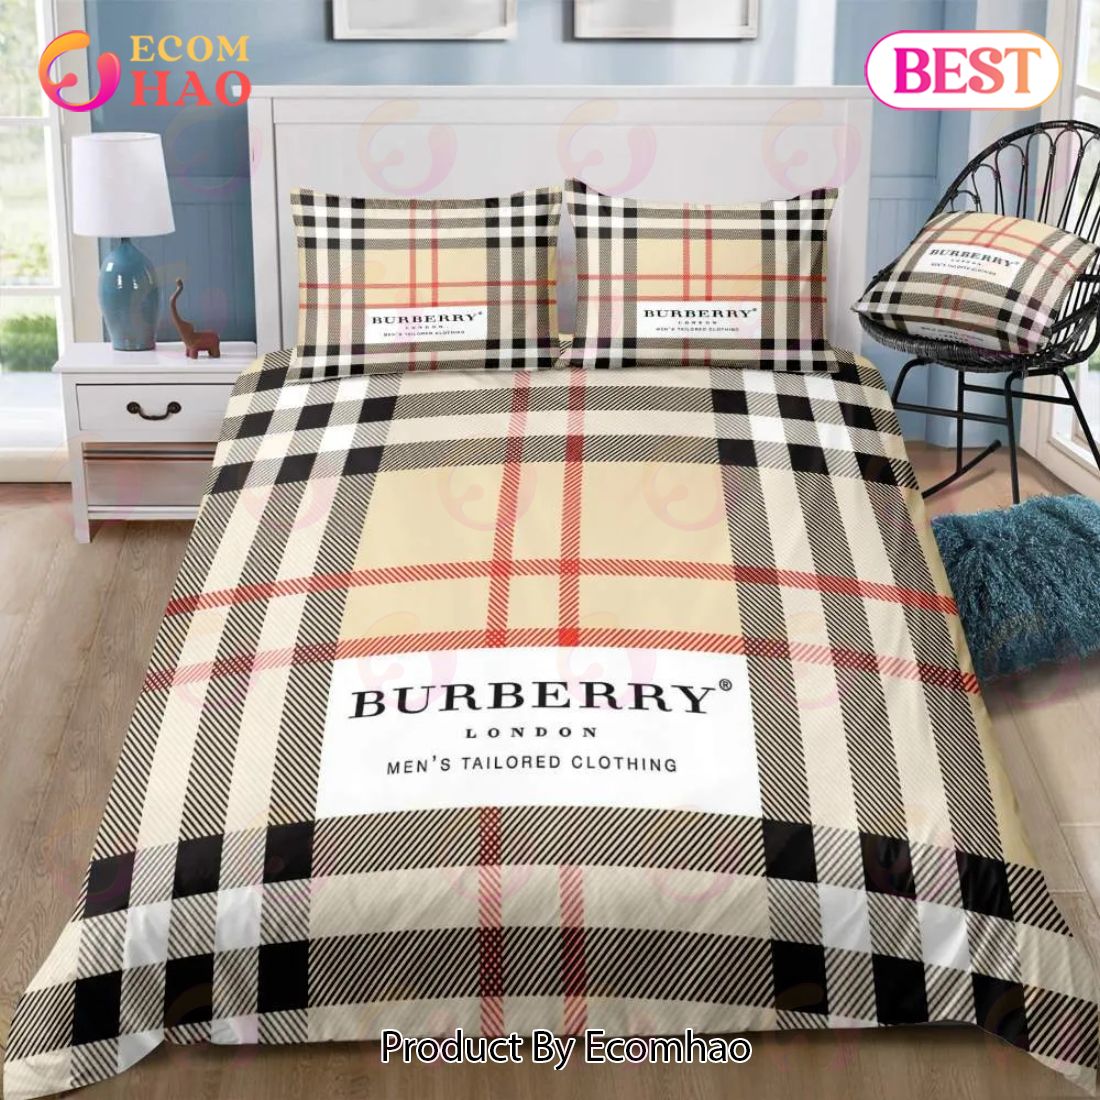 Burberry New Luxury Brand Bedding Sets Bedspread Duvet Cover Set Bedroom Decor Thanksgiving Decorations For Home Best Luxury Bed Sets Gift Thankgivings And Christmas